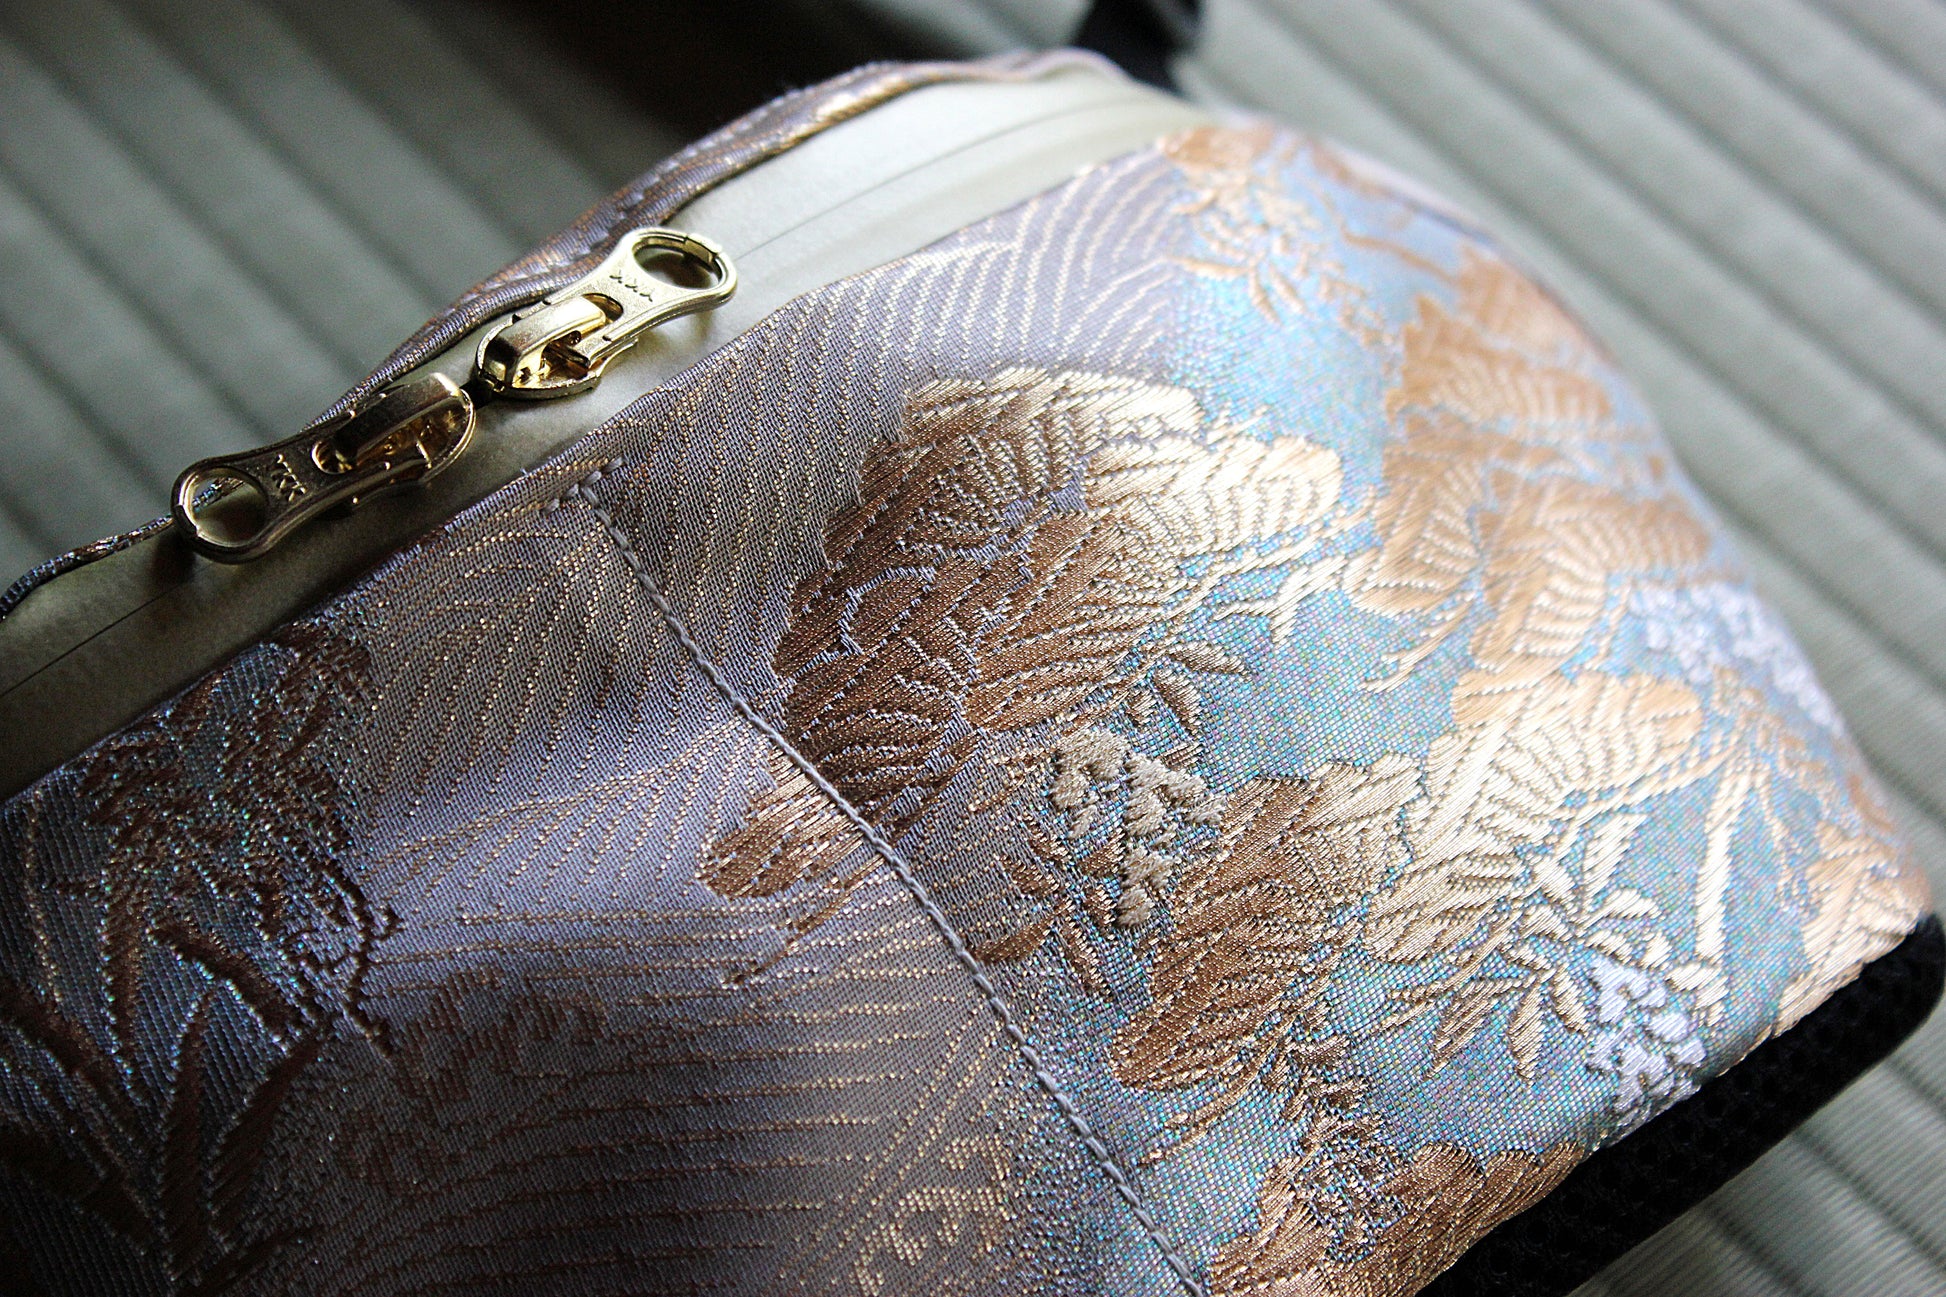 Wisteria & Pearl River bum bag made sustainably handcrafted in Japan from antique kimonos